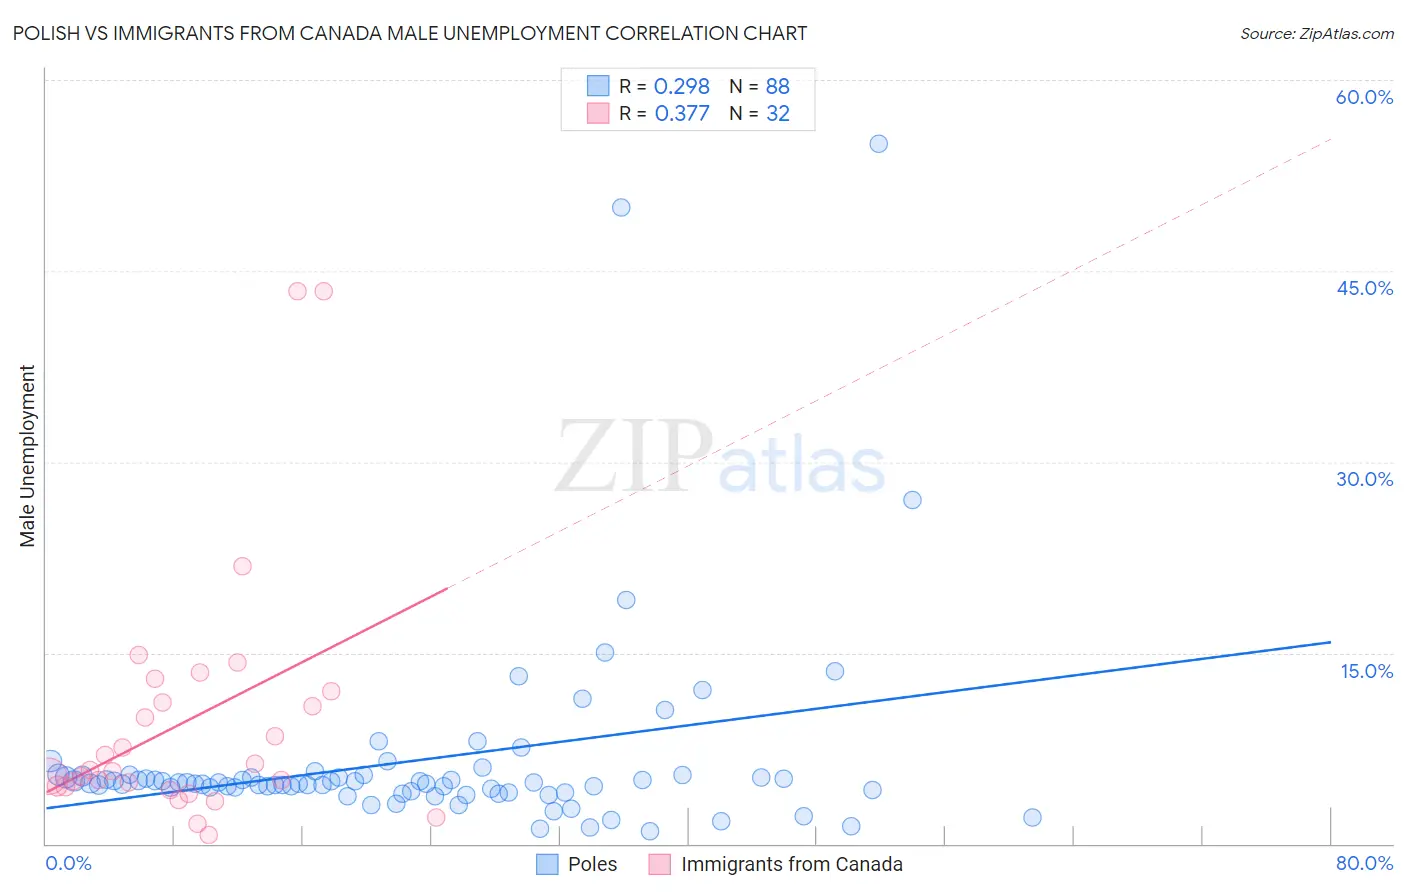 Polish vs Immigrants from Canada Male Unemployment